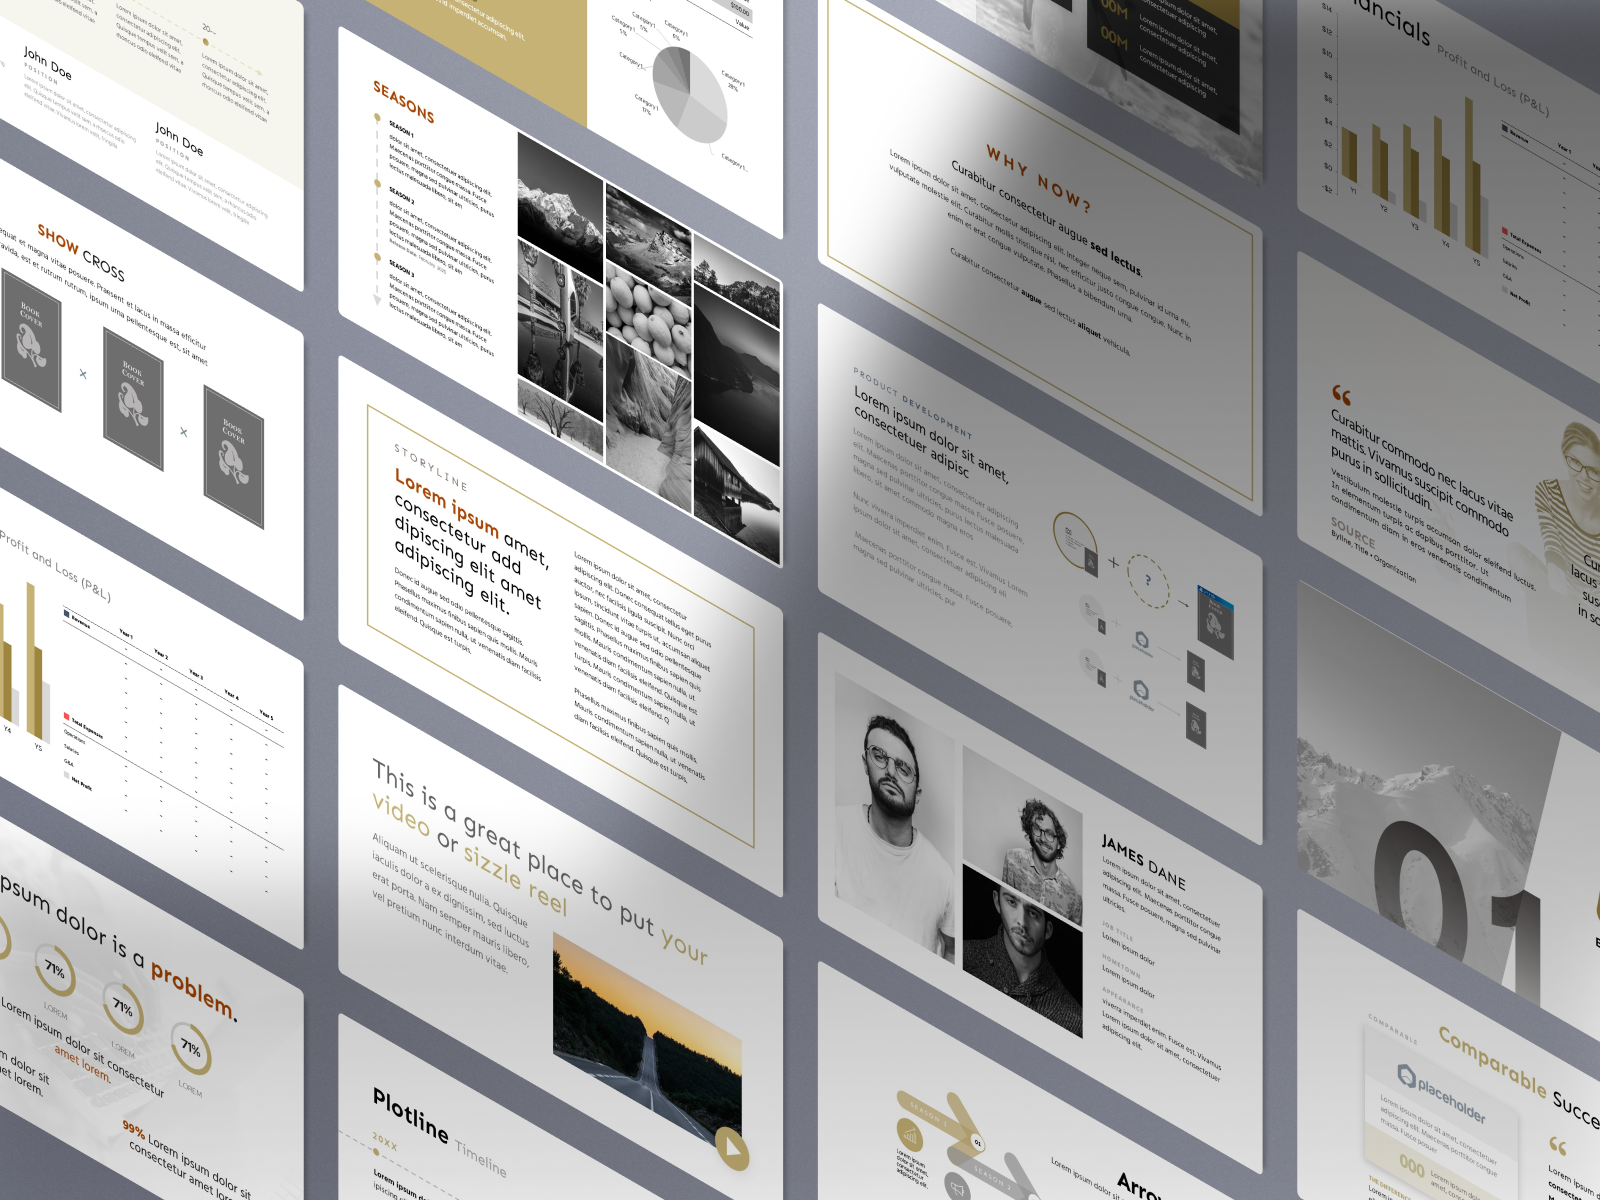 Film Pitch Deck Template by VIP Graphics on Dribbble